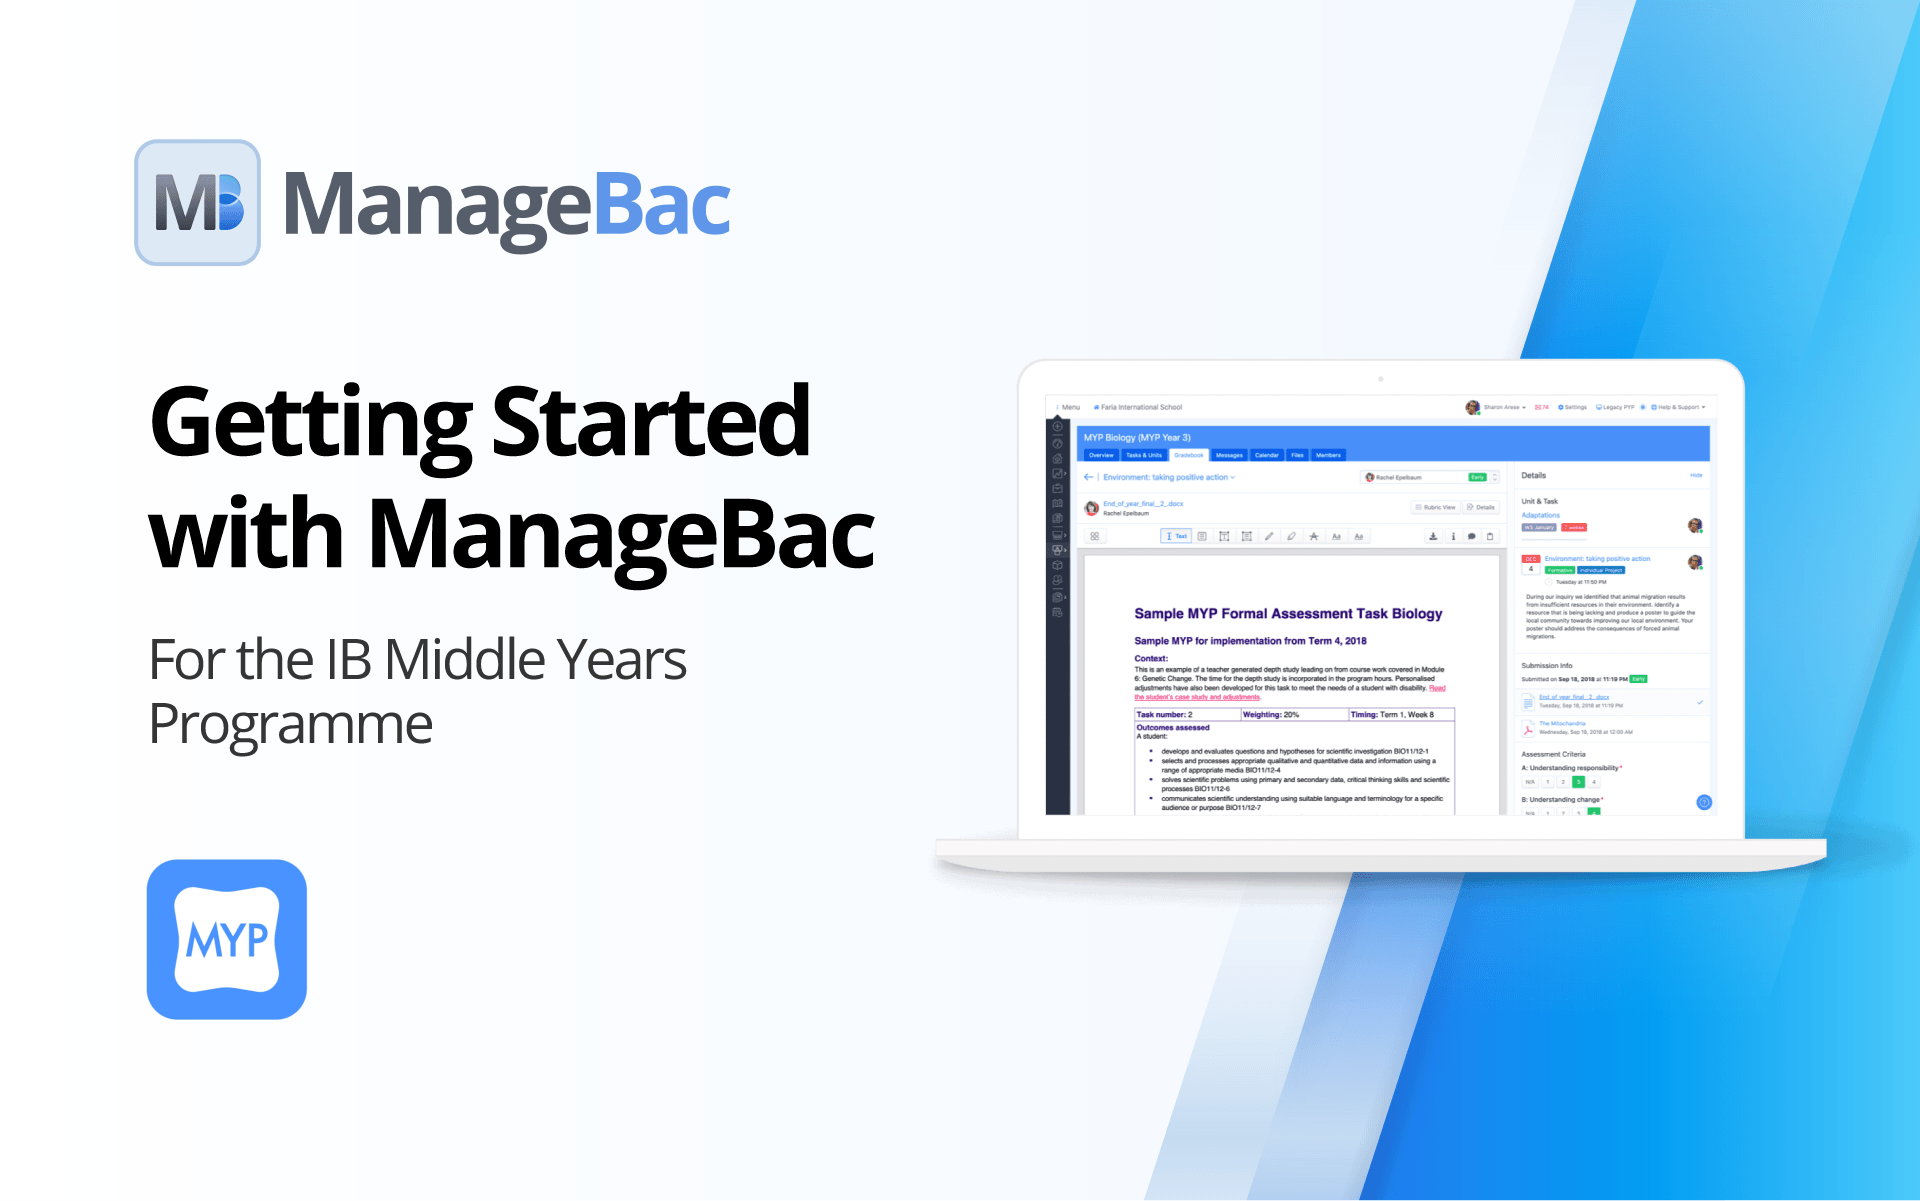 Getting Started with ManageBac for the IB Middle Years Programme